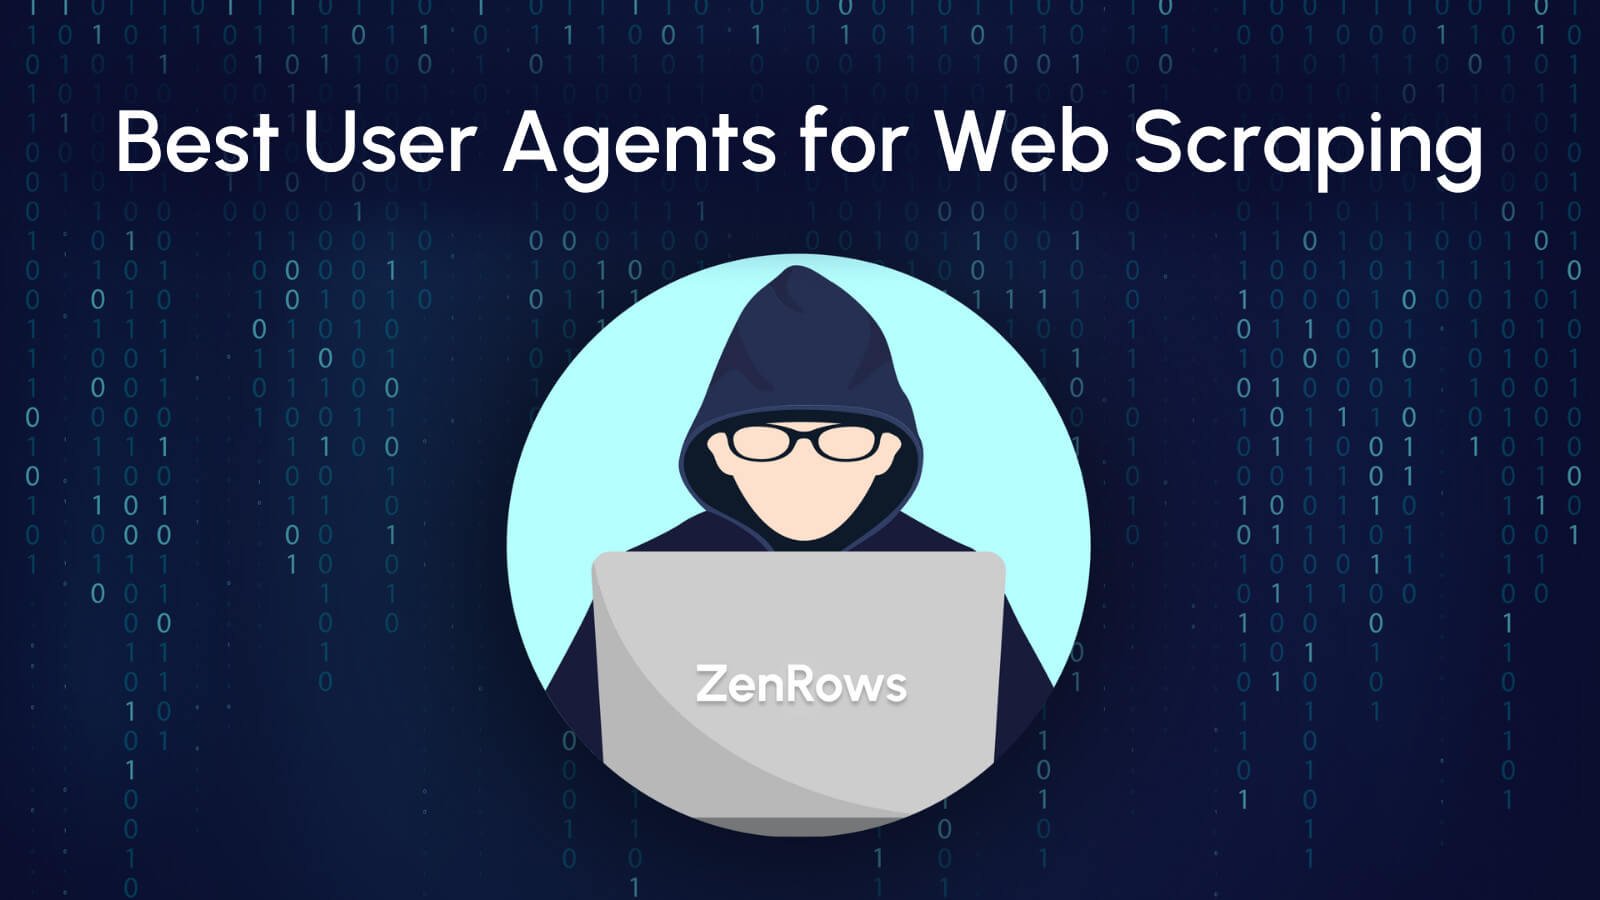 Top List of User Agents for Web Scraping & Tips